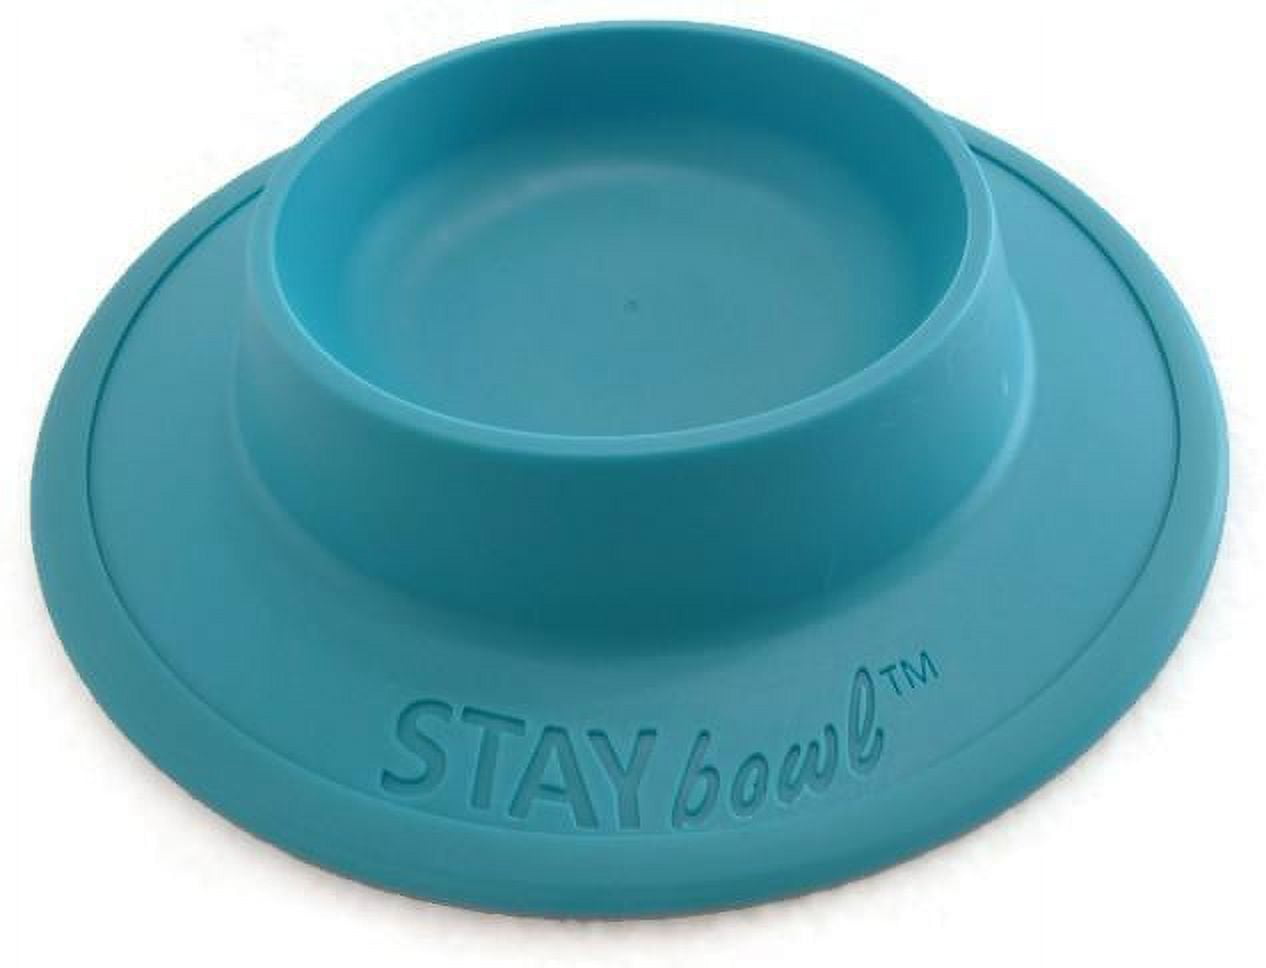 Pet Multifunctional Bowl, Cat Food Toy Bowl, Non-Tipping